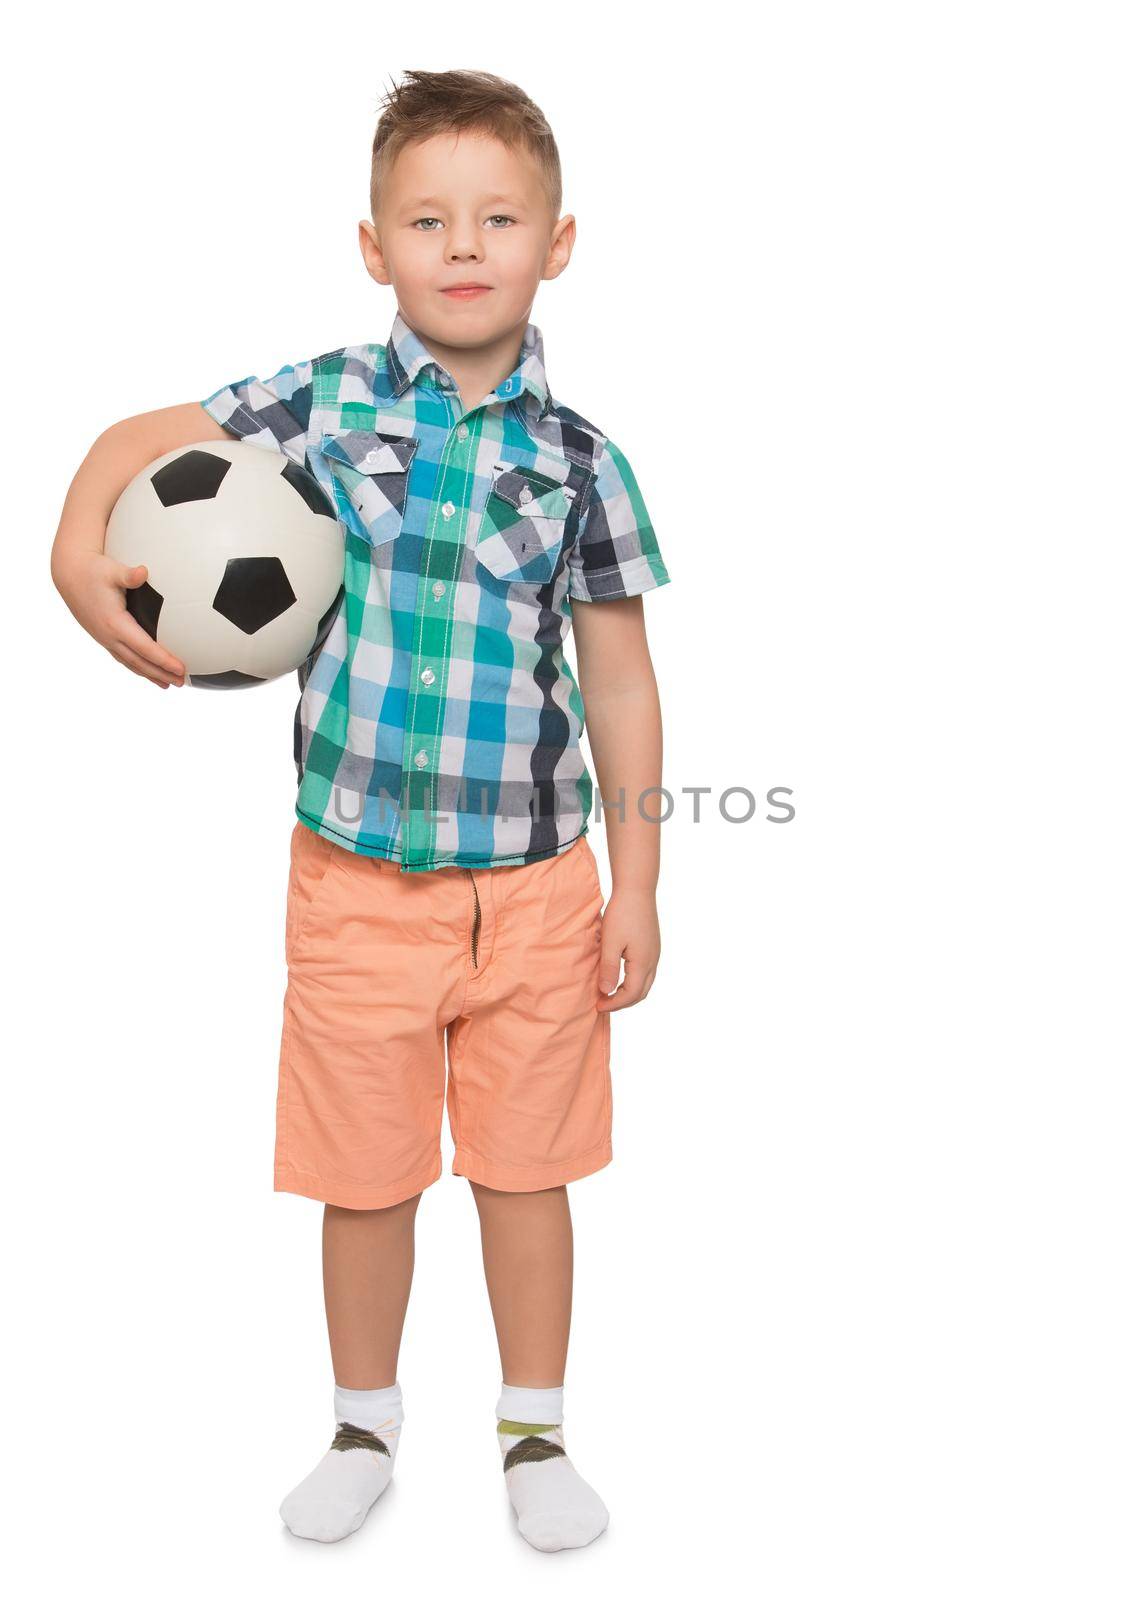 Beautiful little boy with a fashionable hairstyle on the head . The boy is holding under one arm a football . Portrait in full growth - Isolated on white background